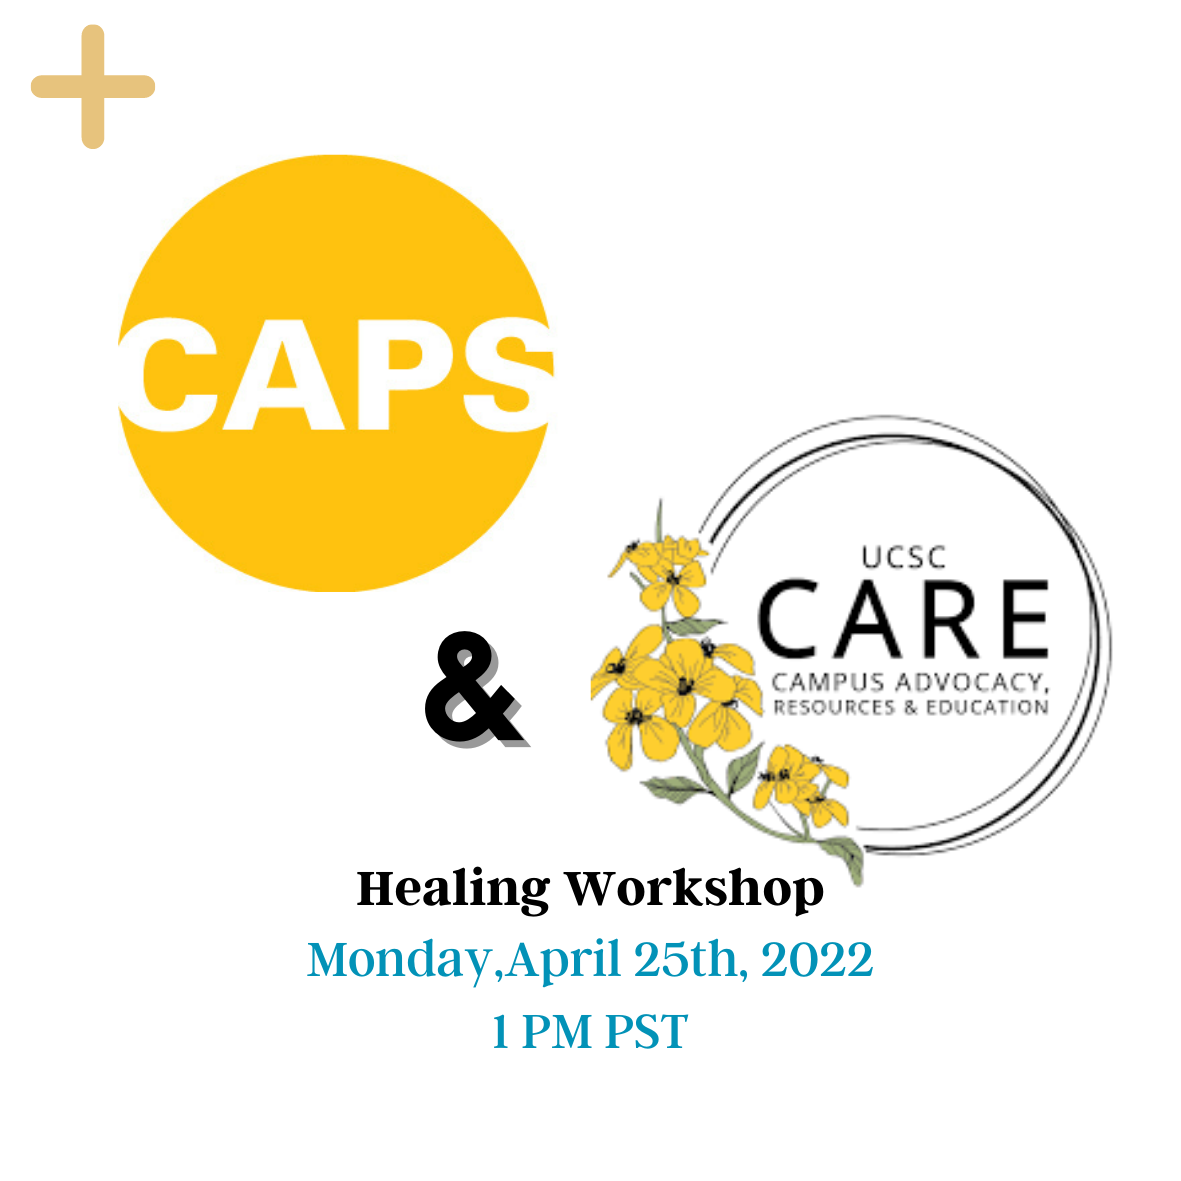 Healing Workshop cover page with the CAPS and CARE logos. The yellow button on the top can be clicked and will provide more information. The picture has a date at the bottom: Monday, April 25th, 2022, 1 PM PST